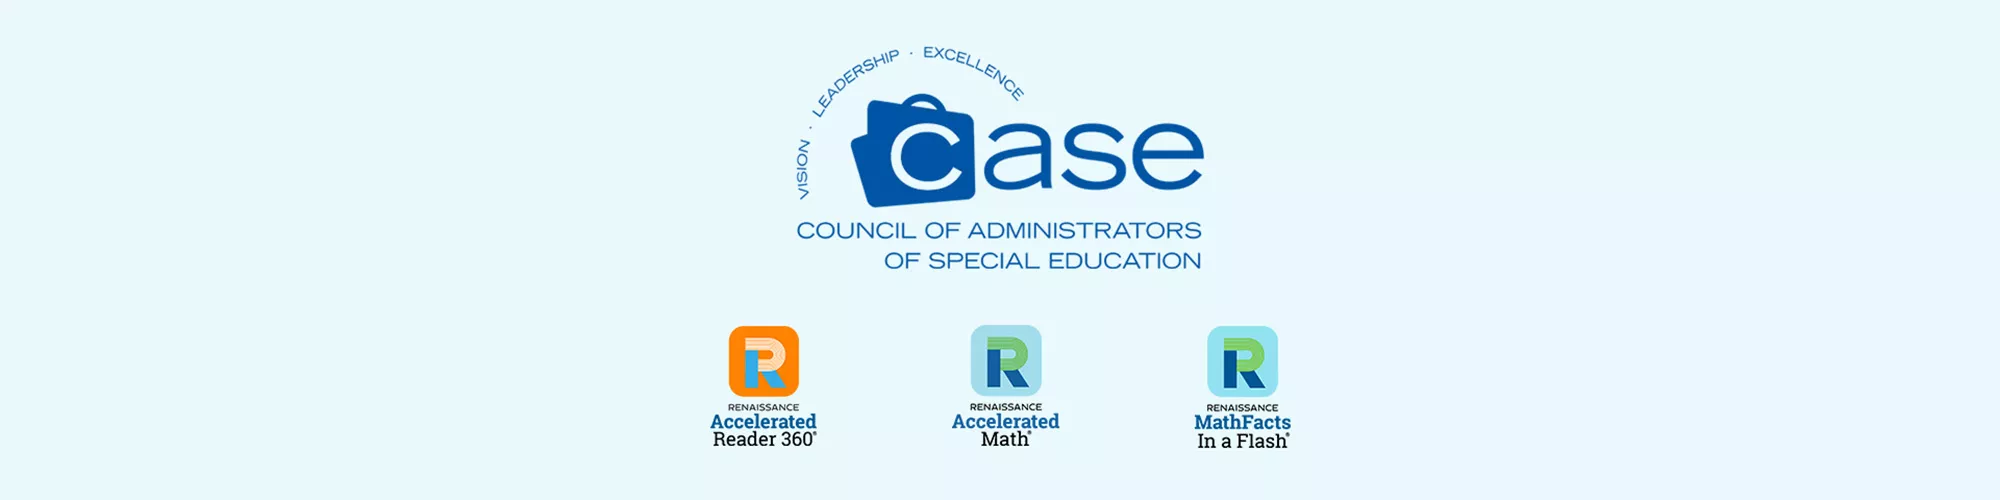 Hero image for the The significance of CASE’s endorsement page